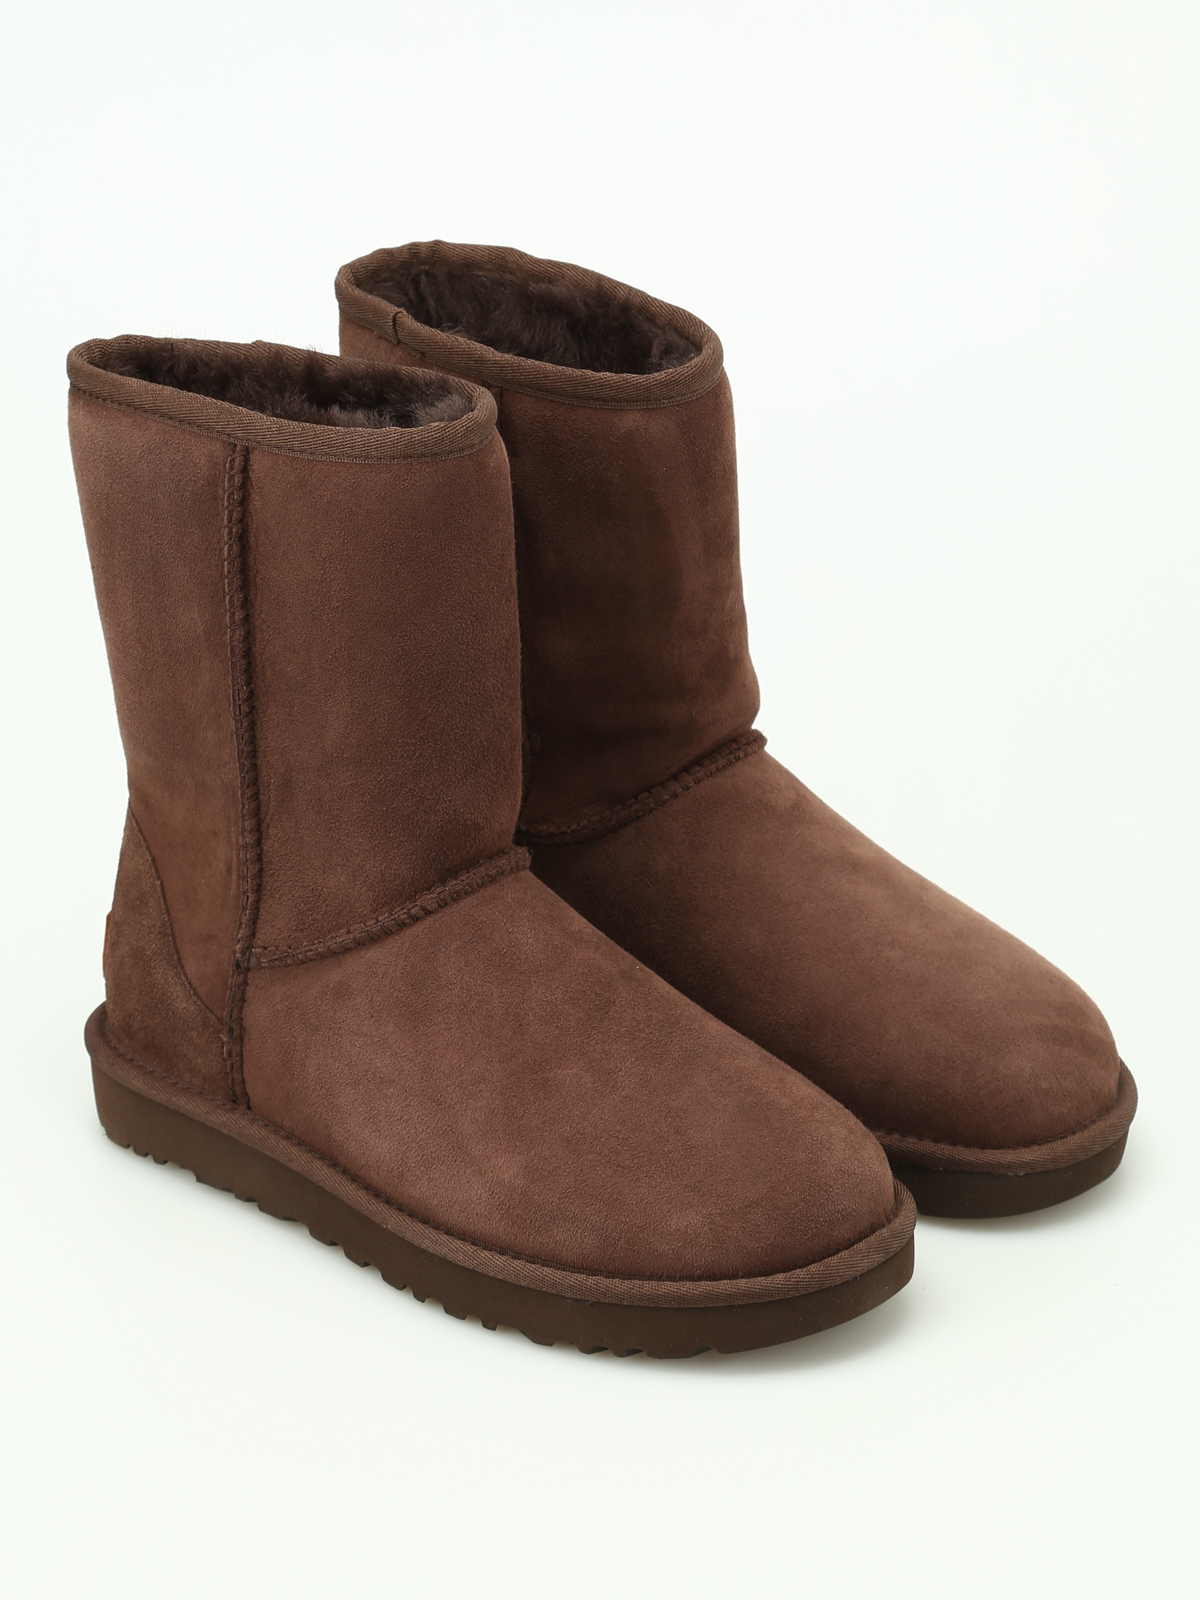 Ugg - Classic Short II brown ankle 